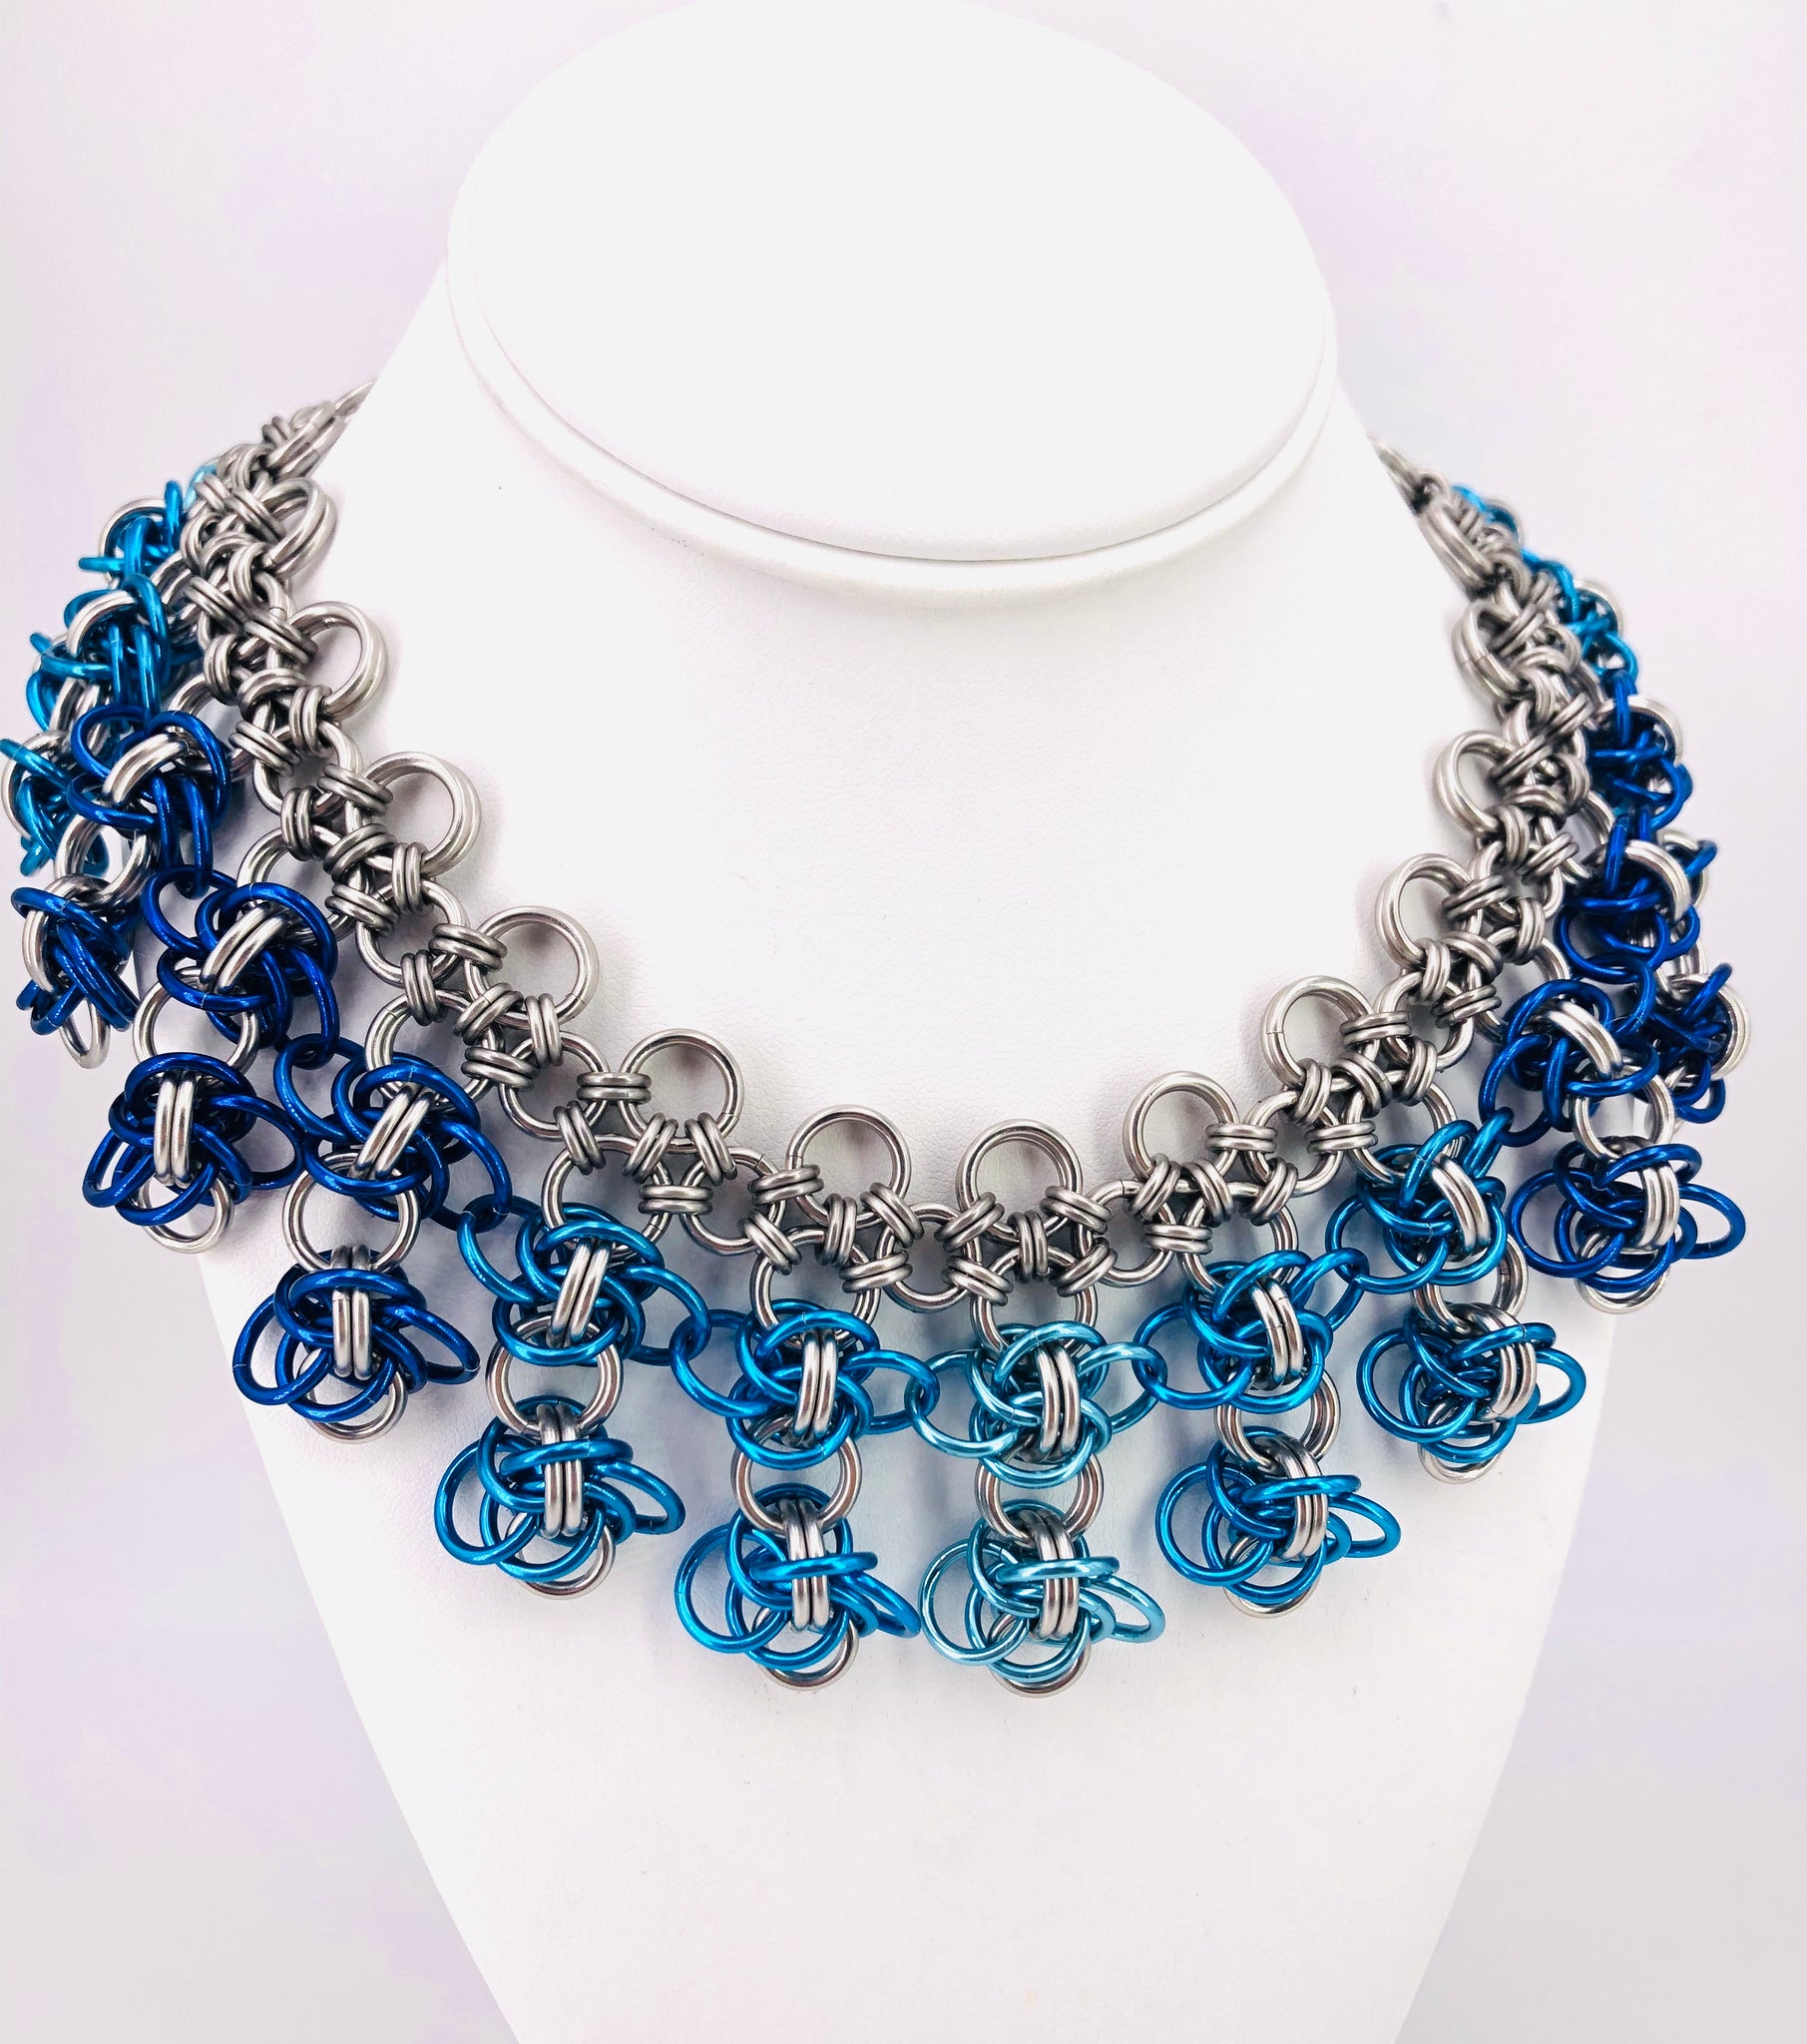 Stainless Steel and Shades of Blue Statement Necklace Collar